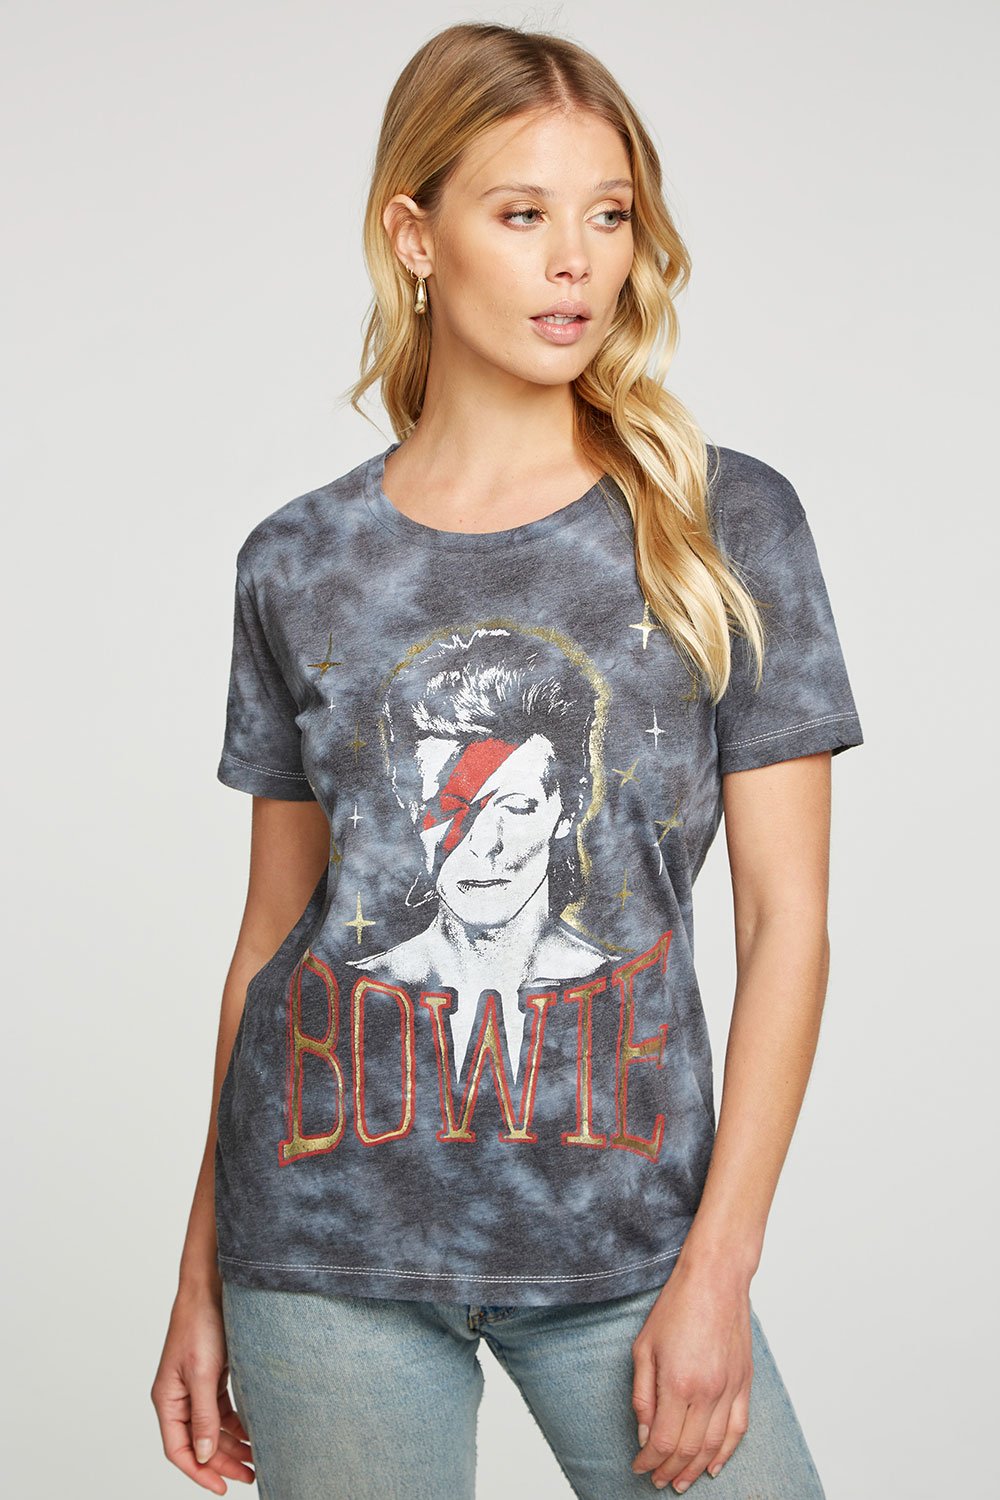 Retro Bowie Tee | Black White Wash - Main Image Number 1 of 2